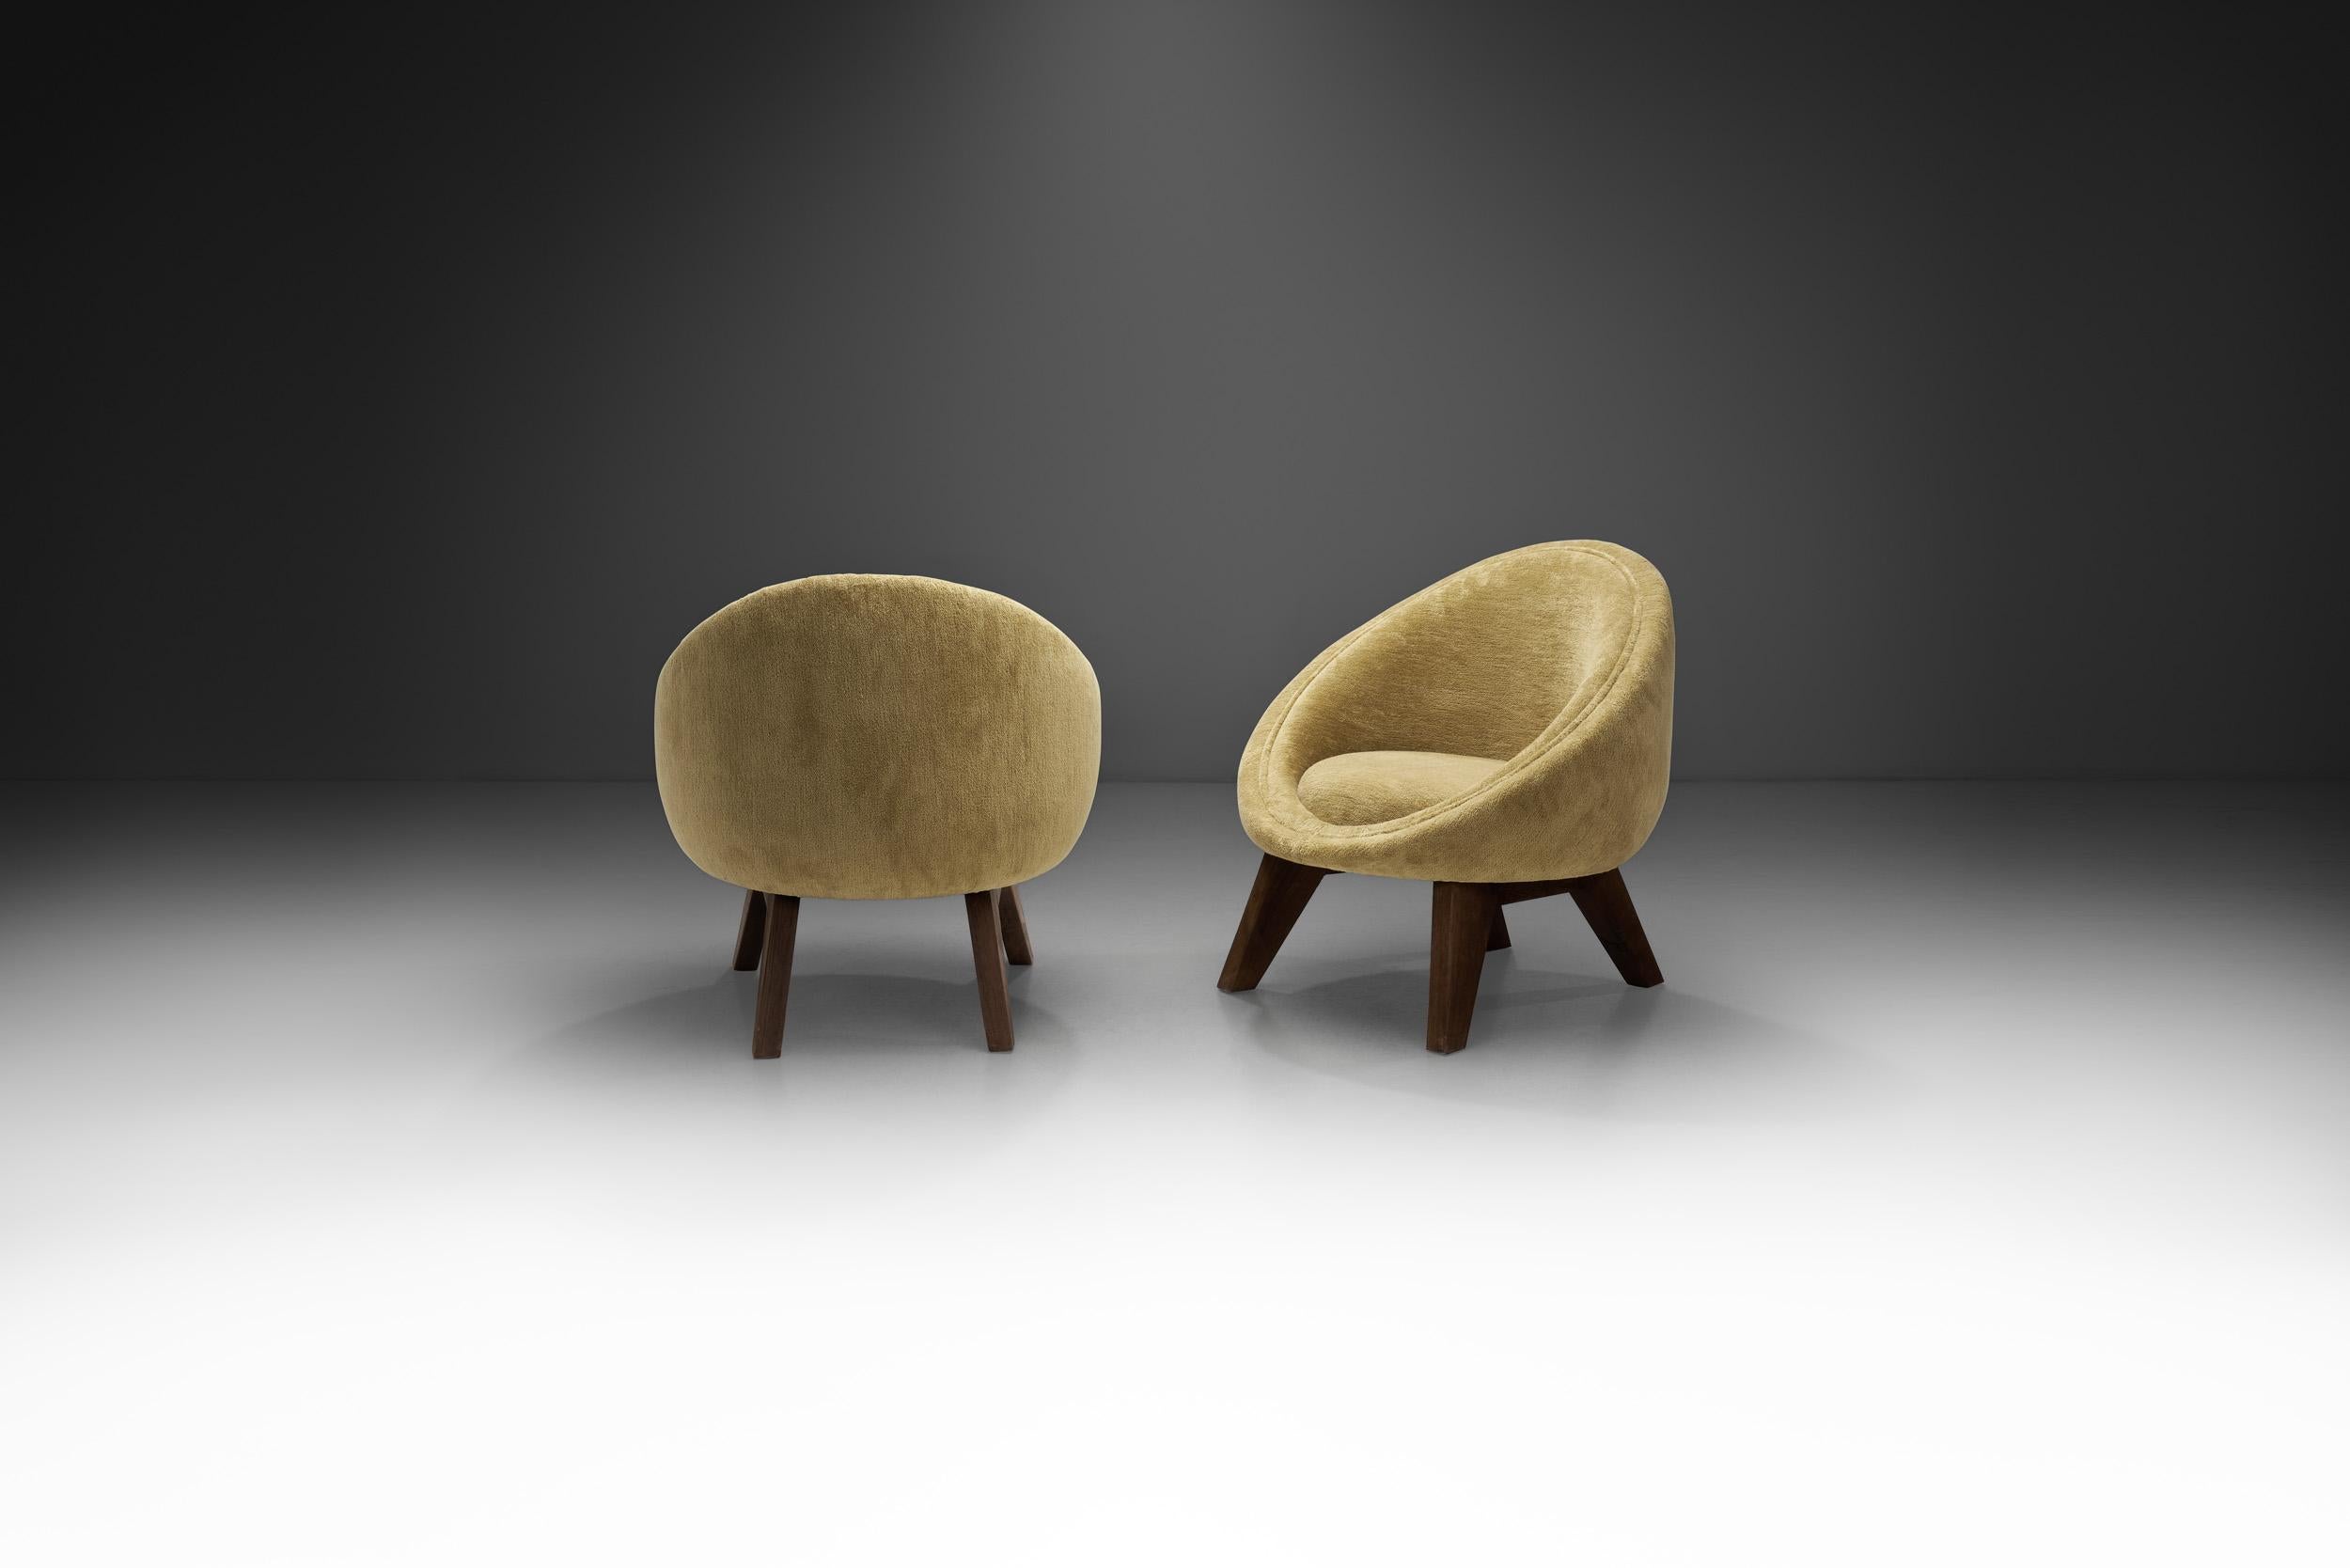 Mid-20th Century European Mid-Century Modern Accent Chairs, Europe, 1960s For Sale